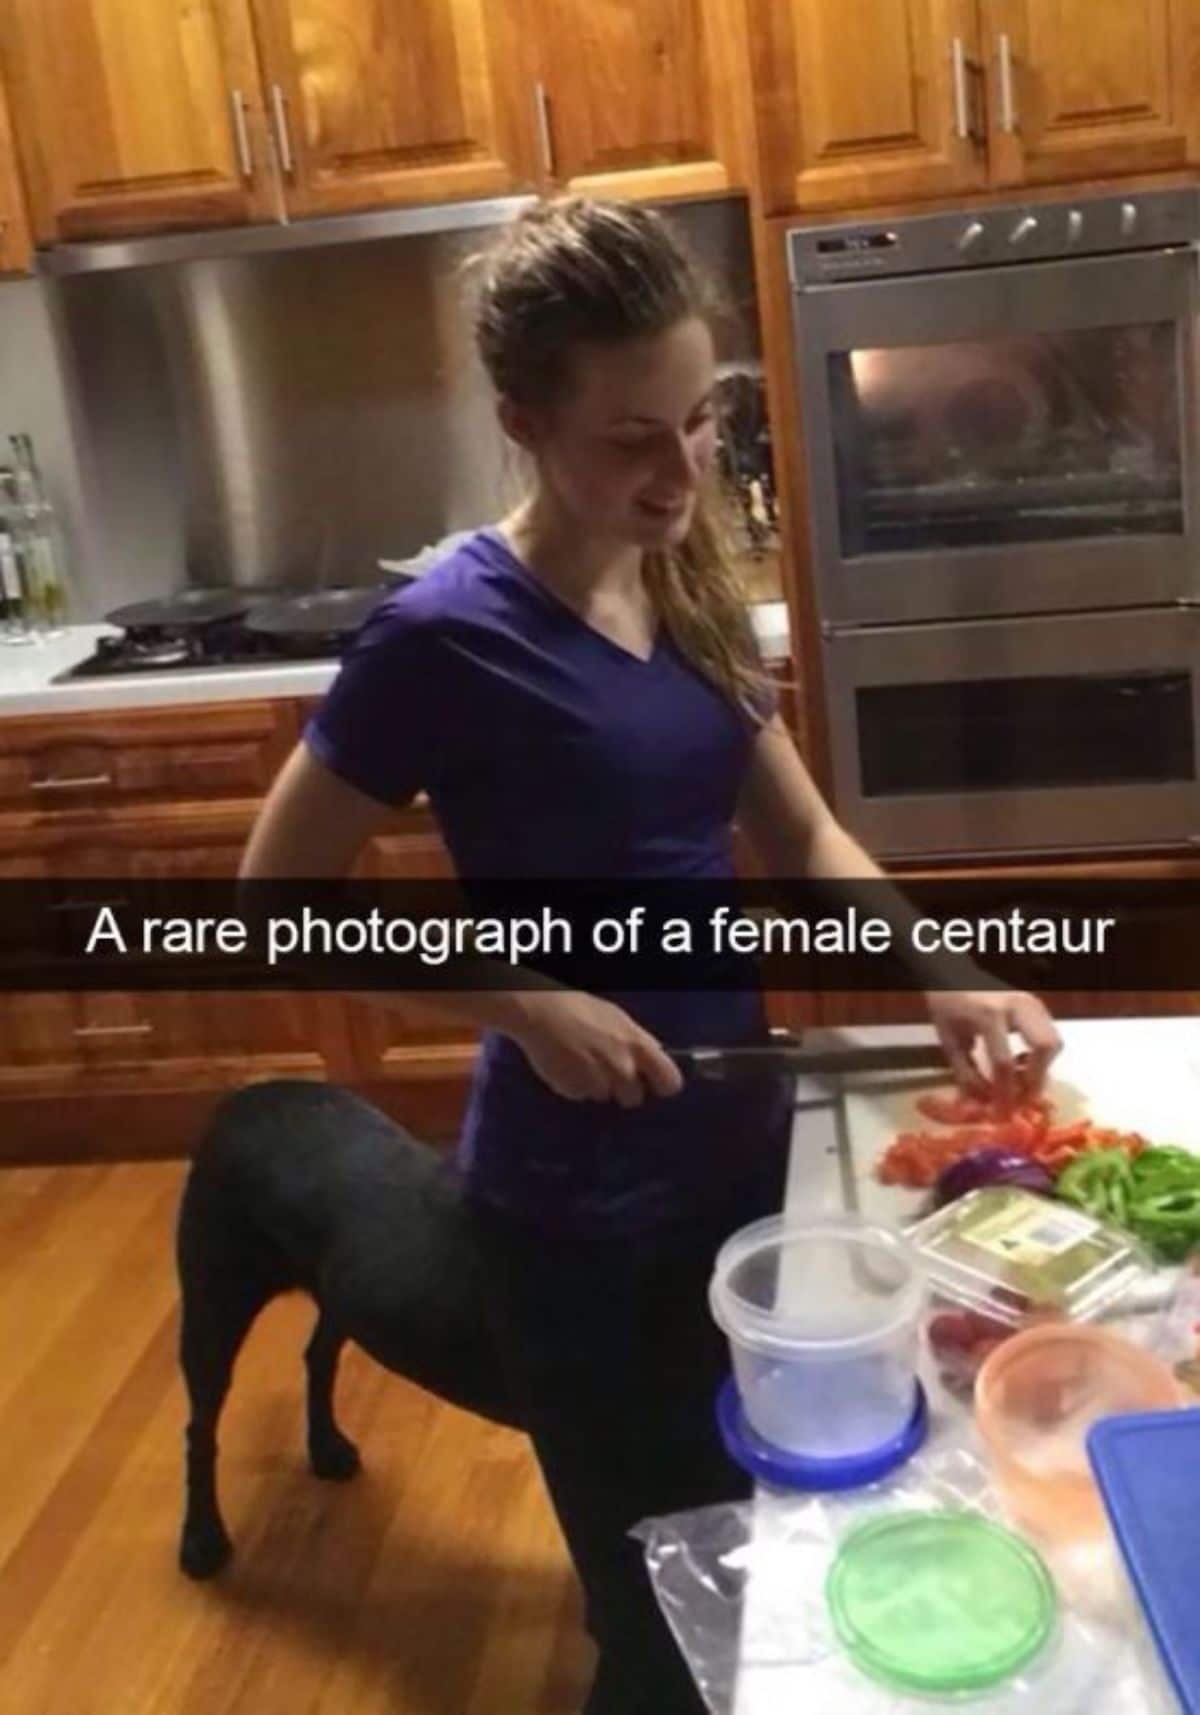 black dog standing behind a woman cutting vegetables at a counter looking like a centaur